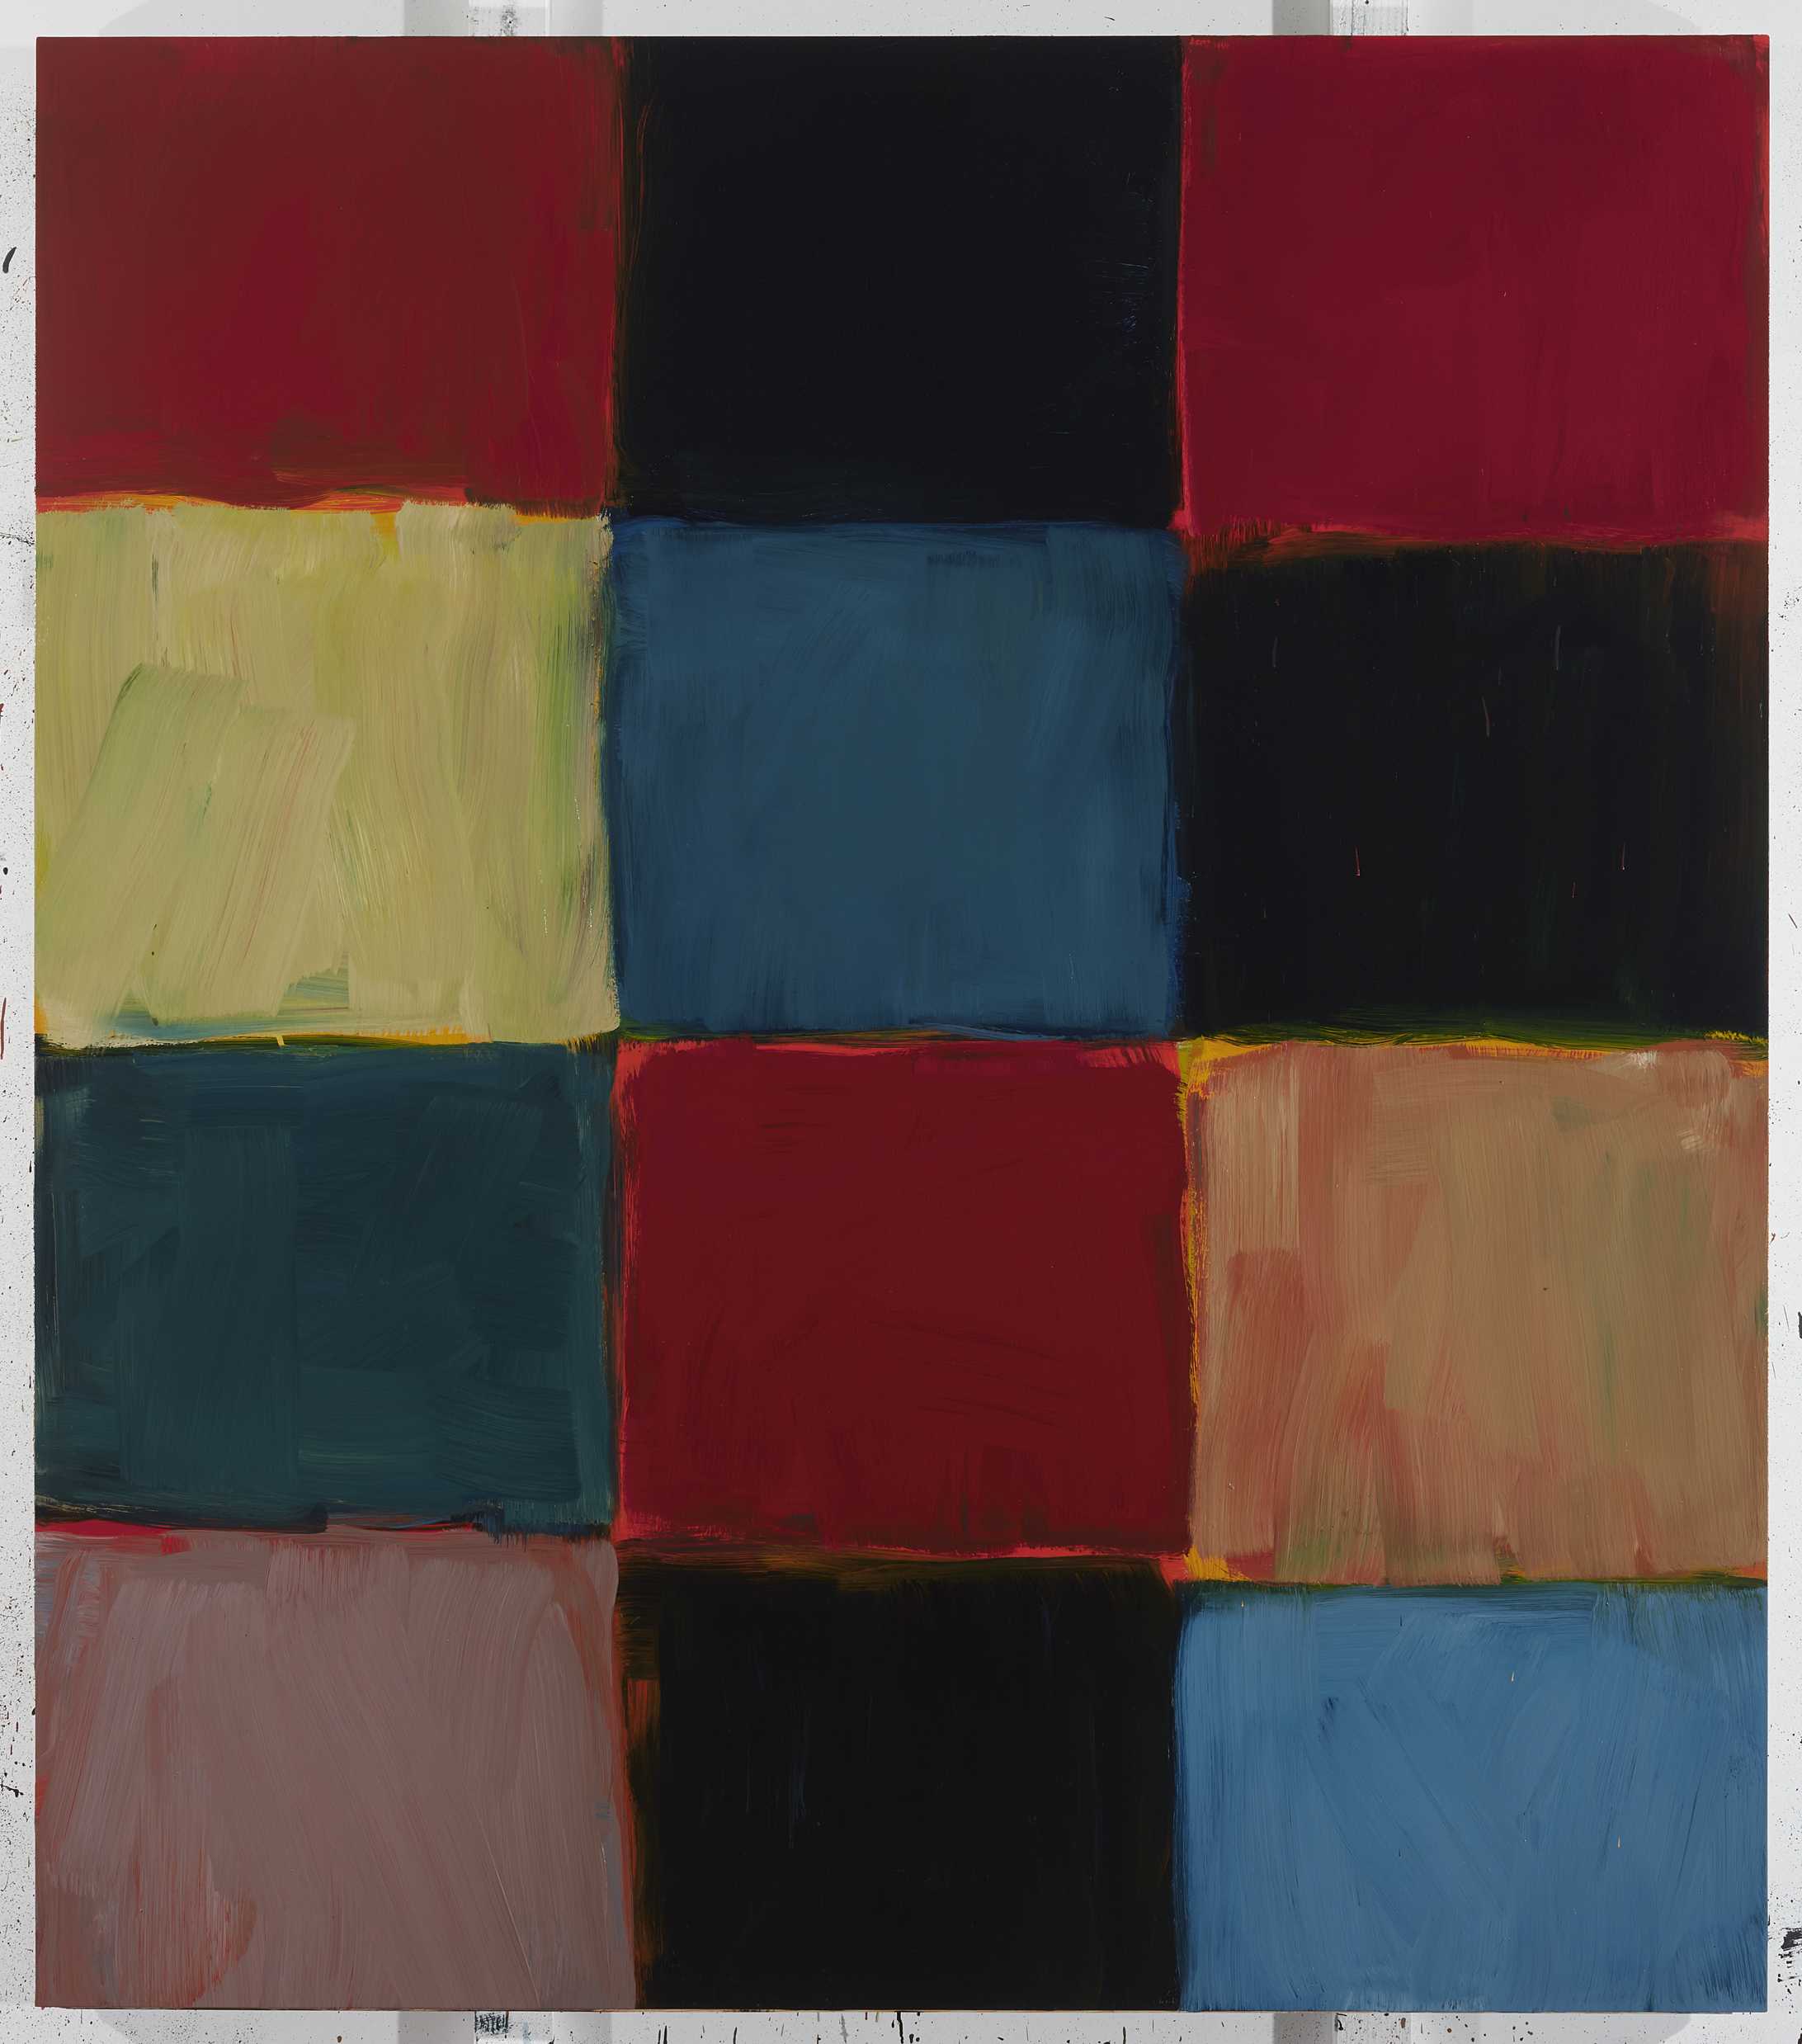 Sea Star: Sean Scully, Exhibition, National Gallery, London: 13 April 2019 – 11 August 2019